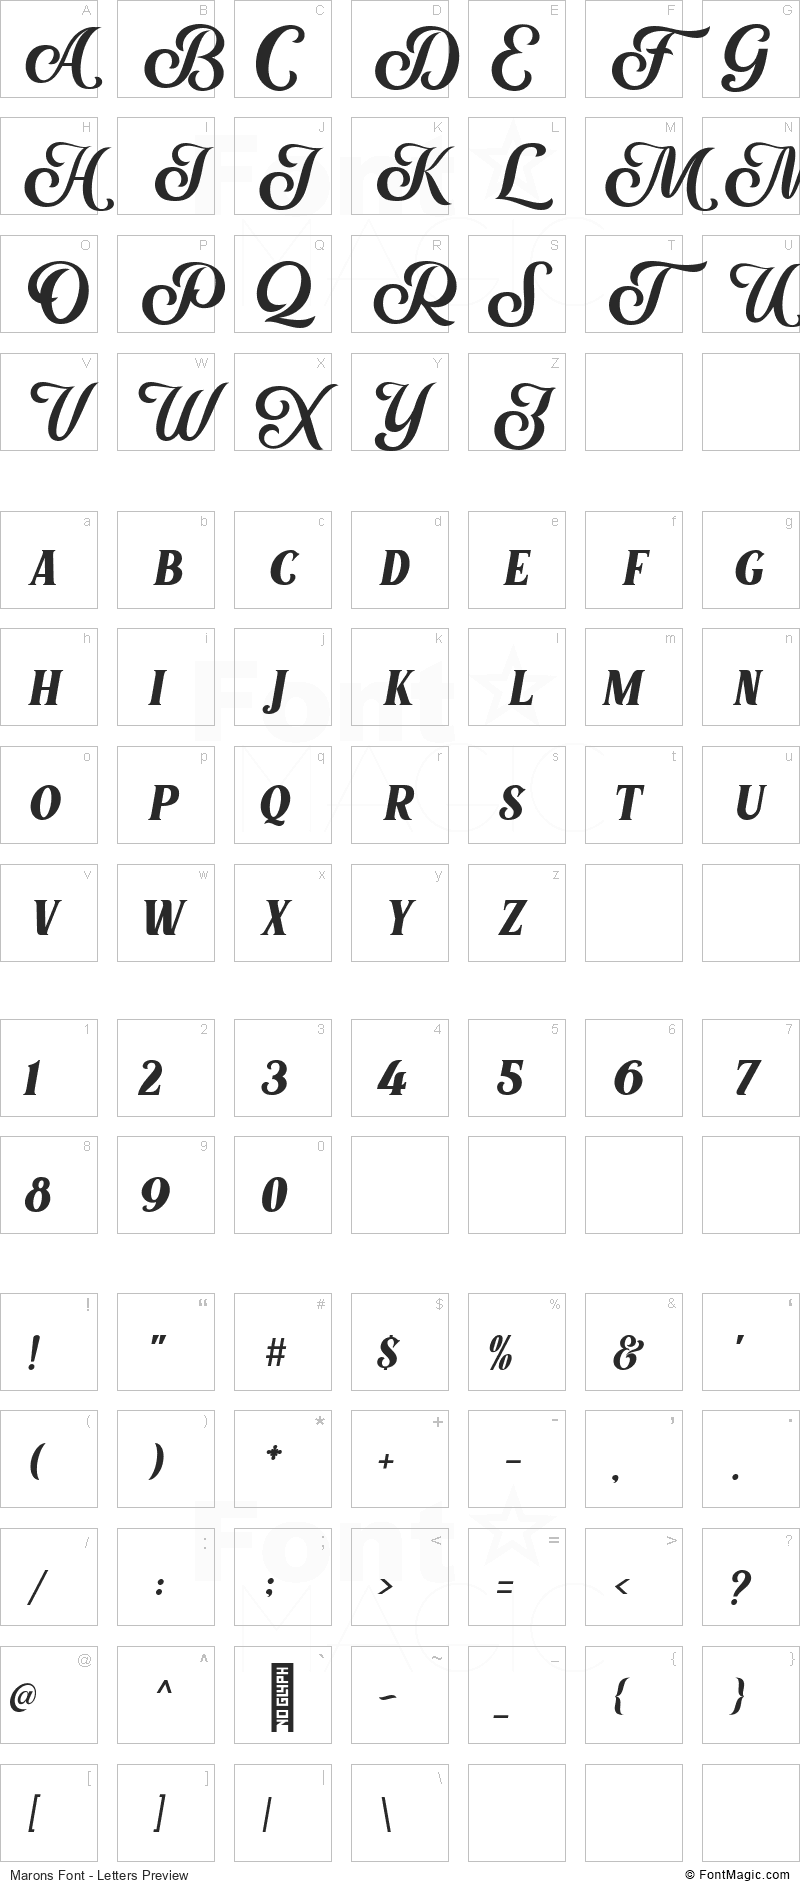 Marons Font - All Latters Preview Chart